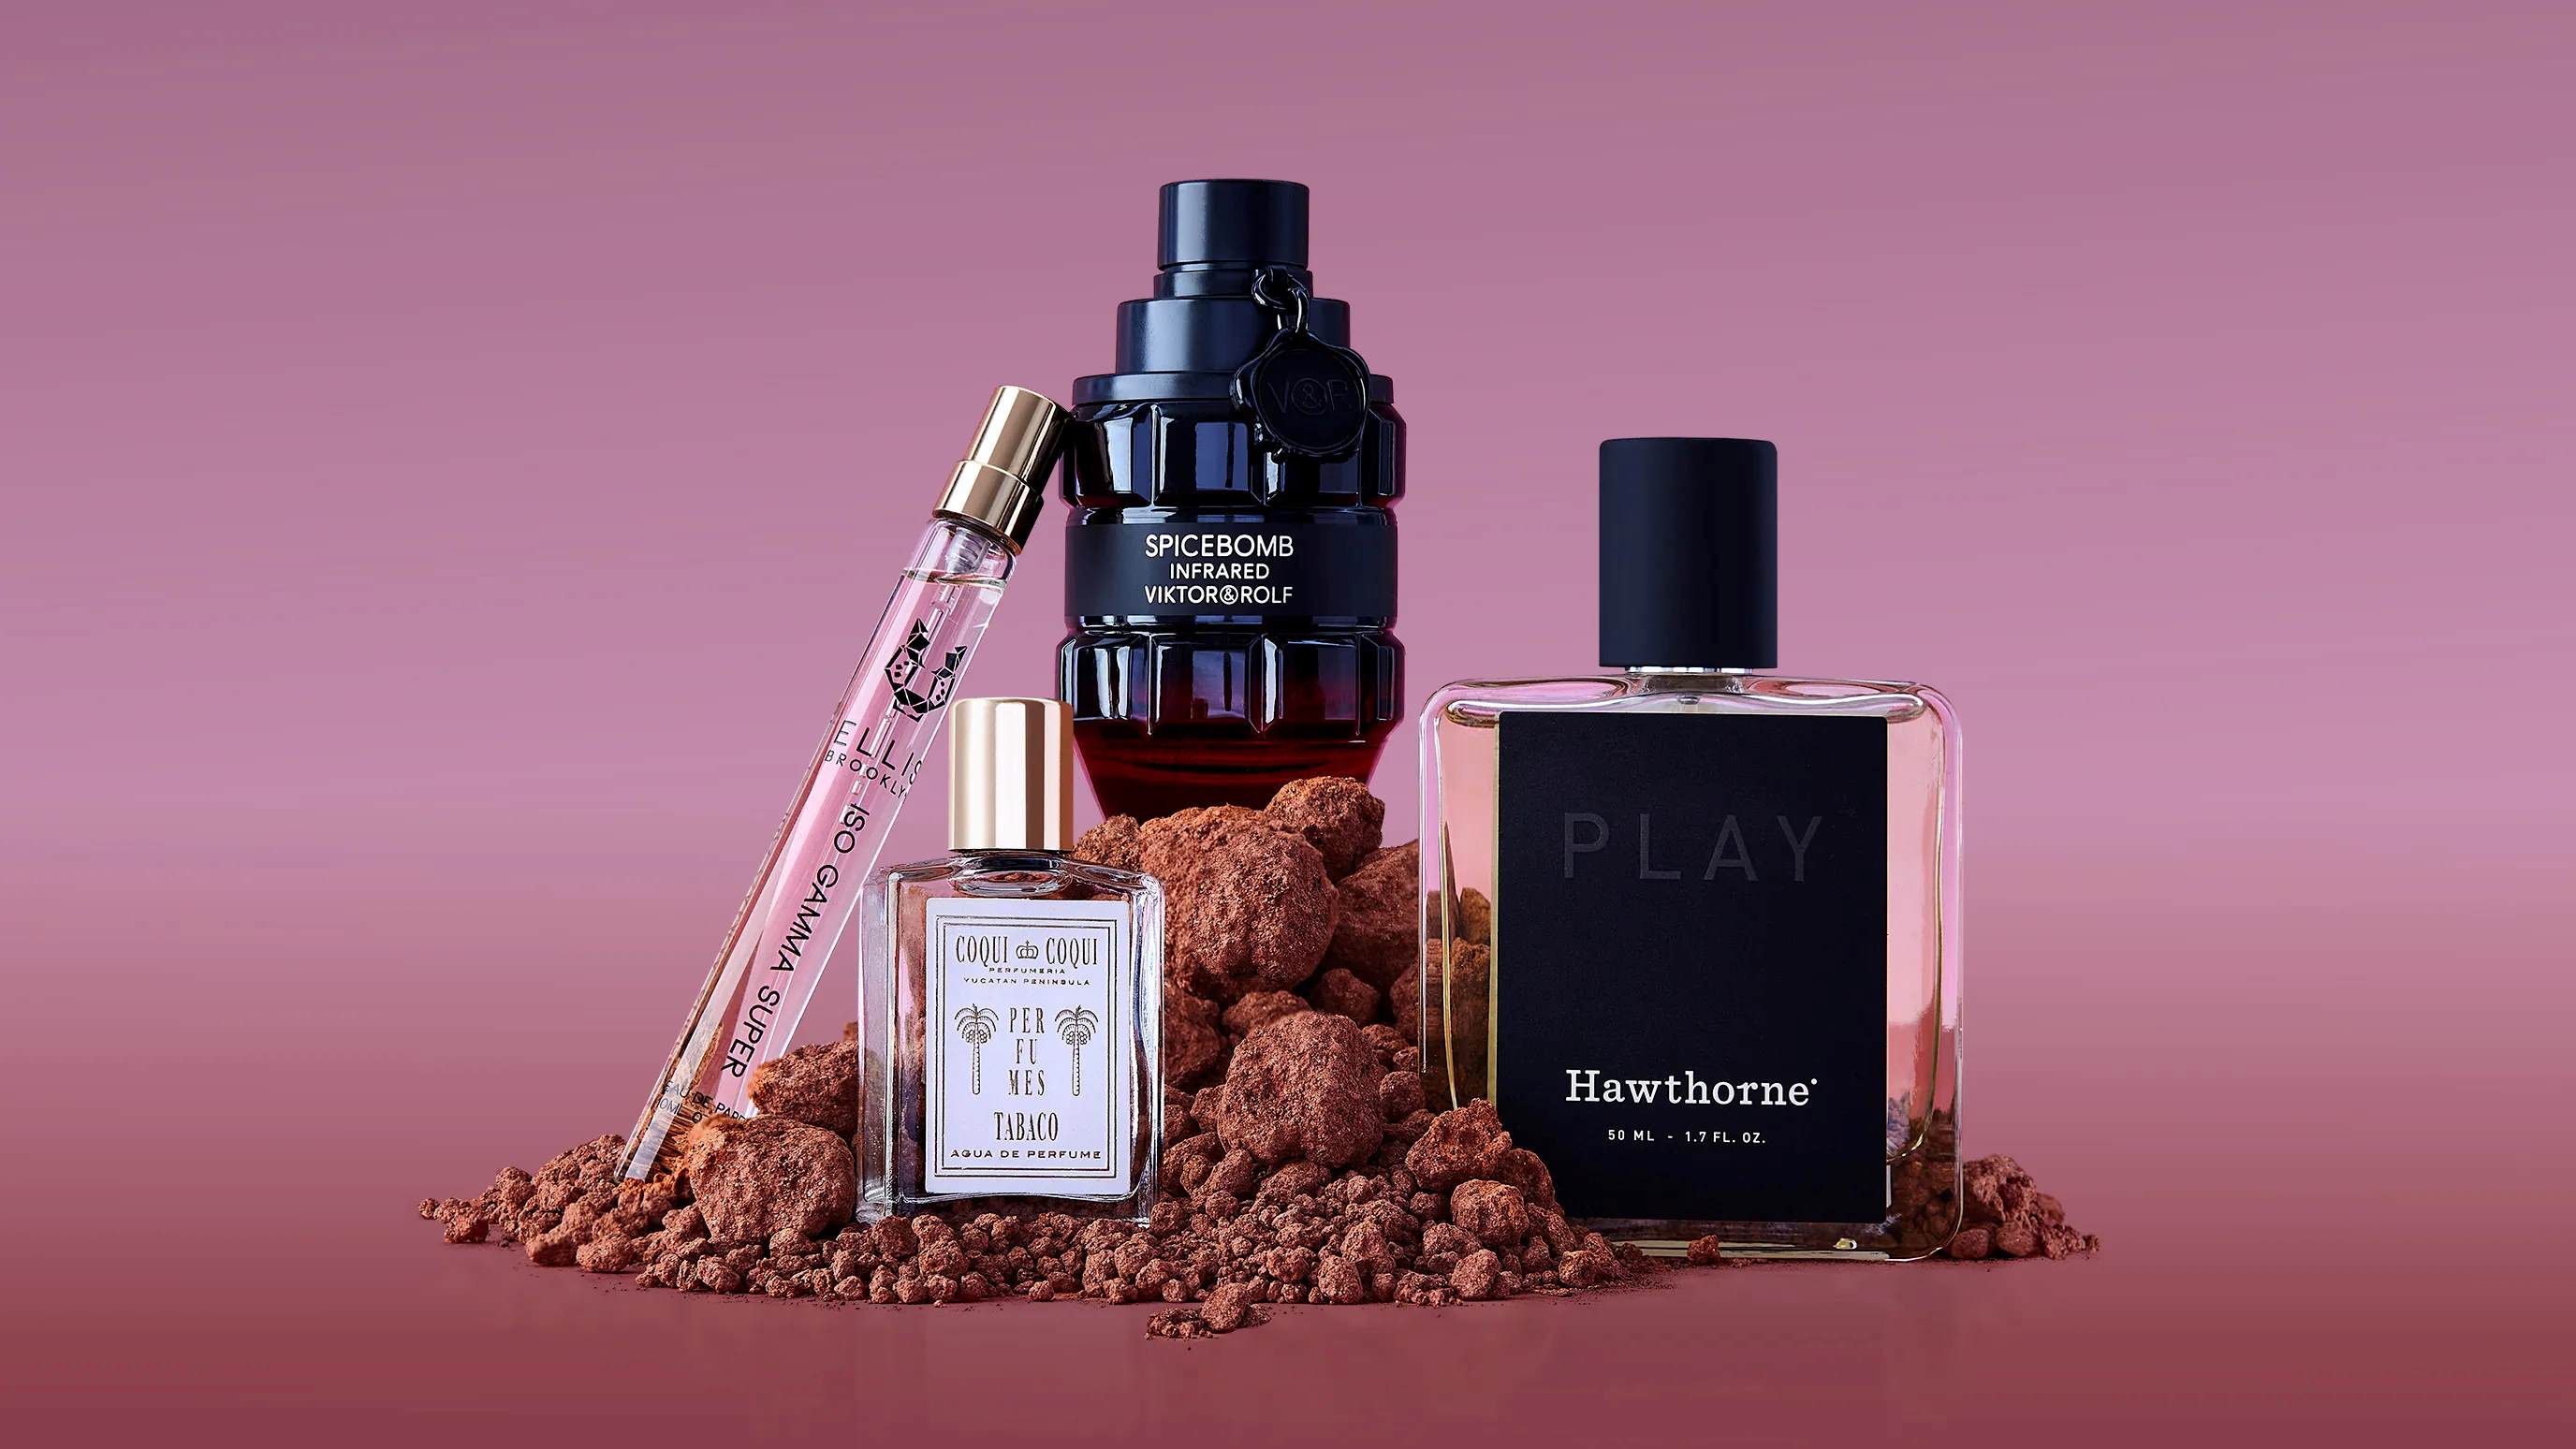 Top Fragrance Review: Unbiased Analysis and Recommendations